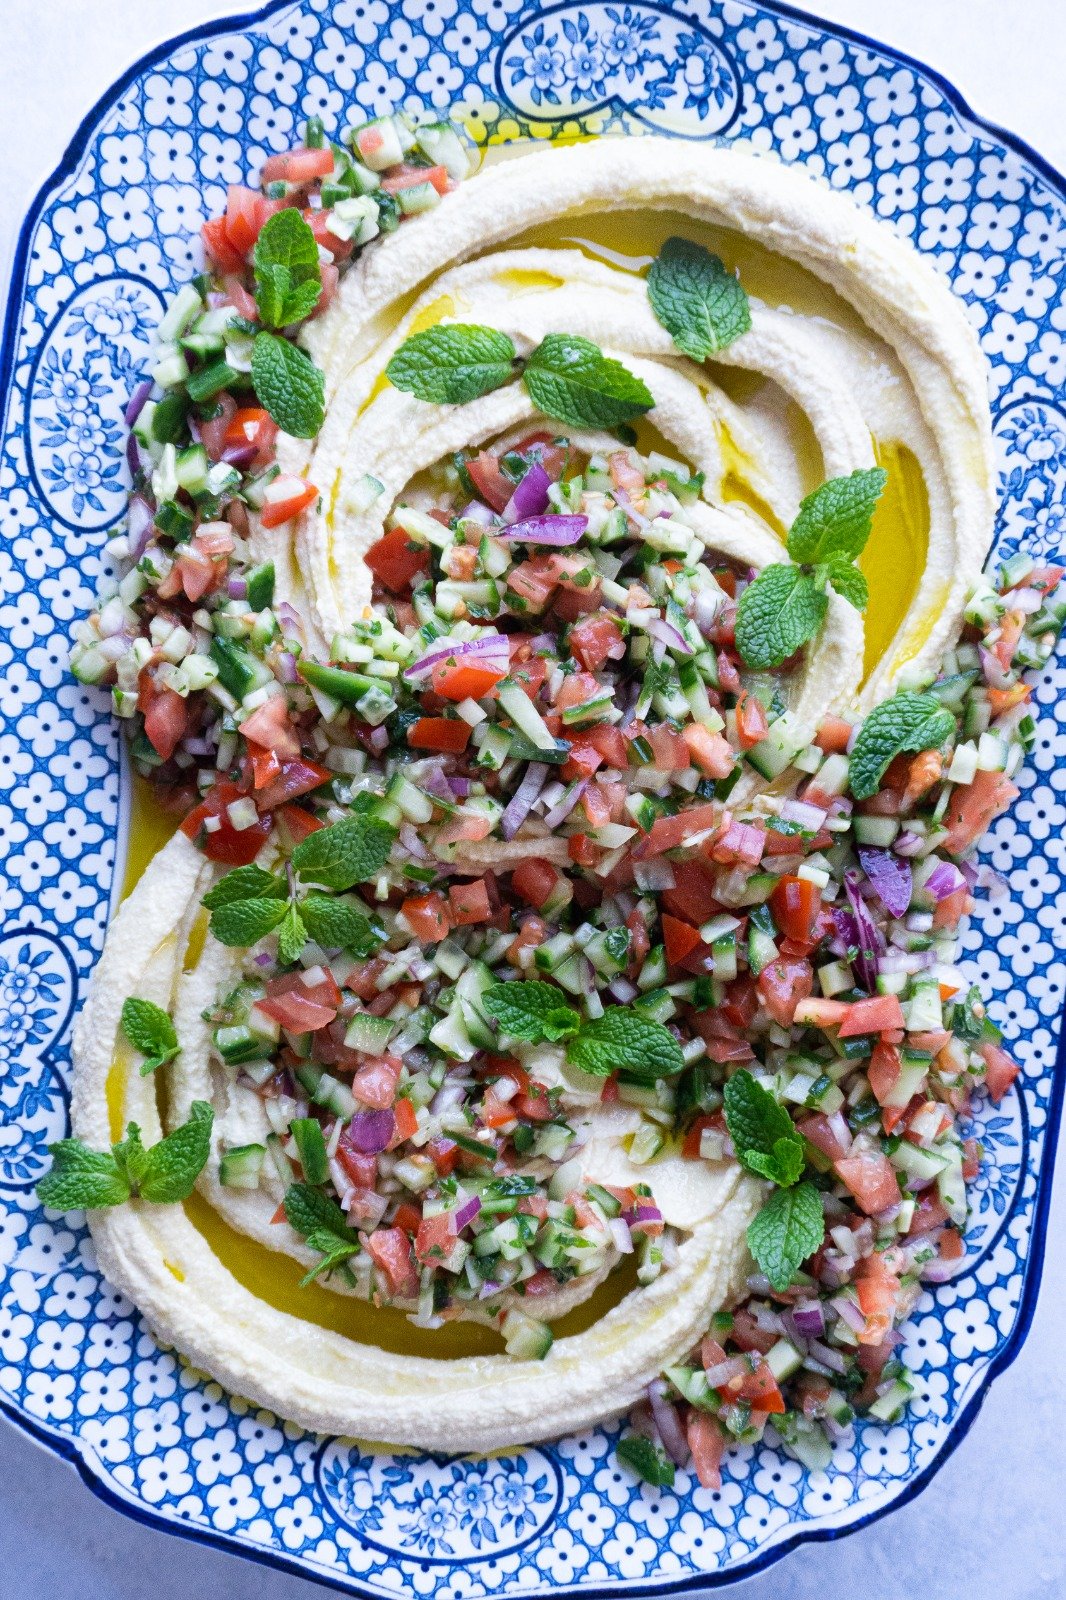 This Hummus Loaded With Shirazi Salad is just picture perfect, the mixture of vegetables, juices and herbs are absolutely delicious.